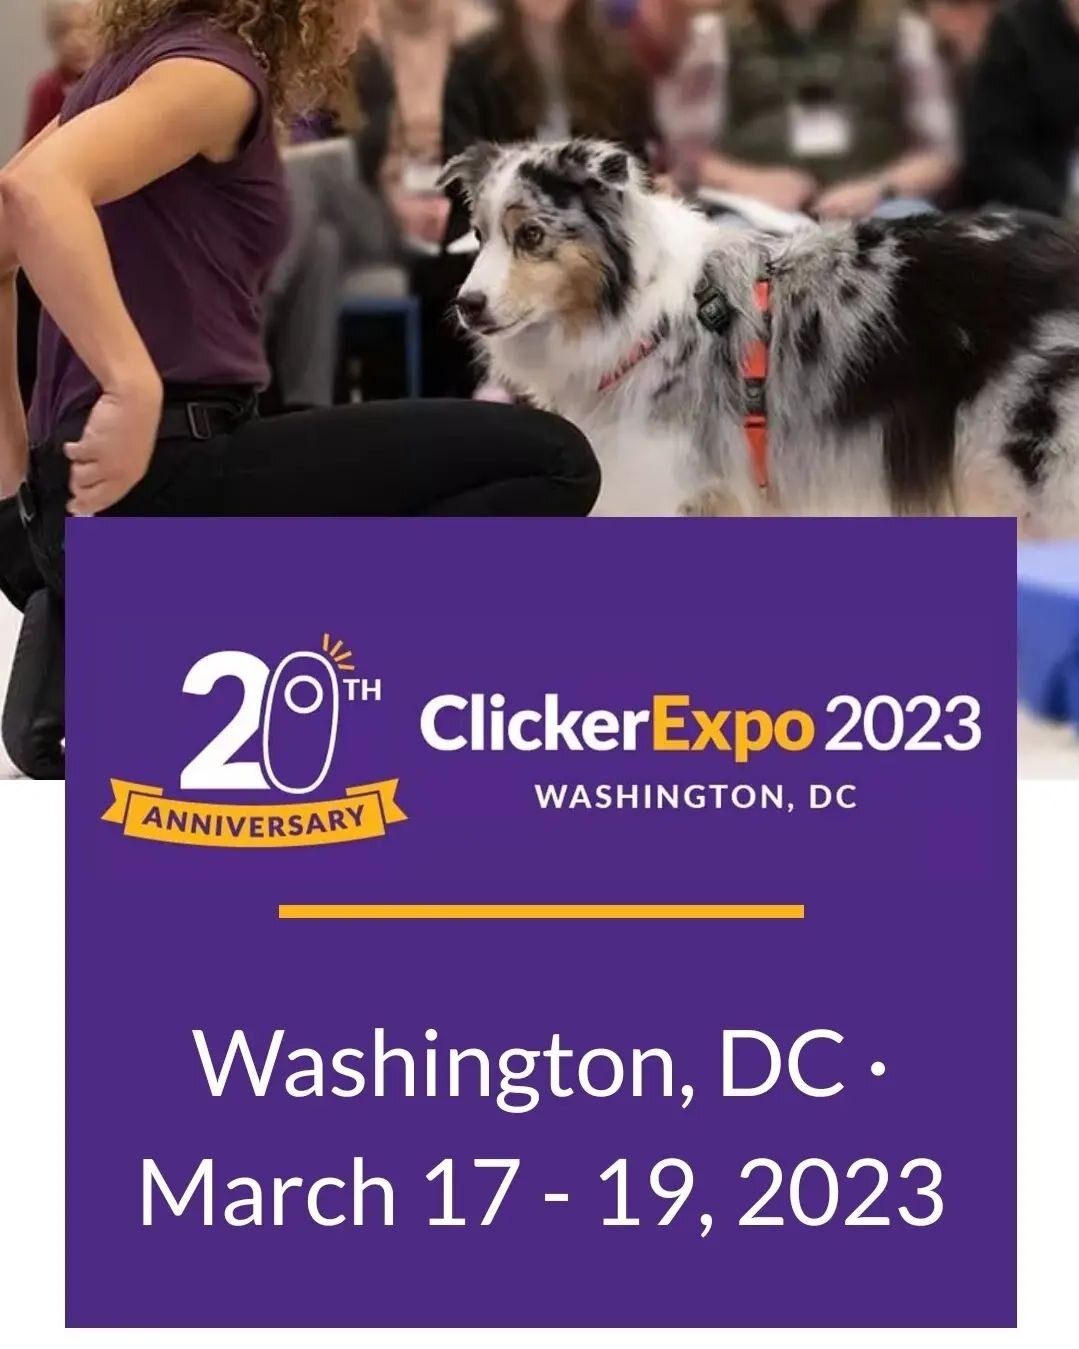 I am attending #clickerexpo2023 

This means that I will be in seminars all day, from the 17th to the 19th, and will not be able to answer any messages.

As a Karen Pryor graduate and Certified Training Partner, we are spending the day behind the sce